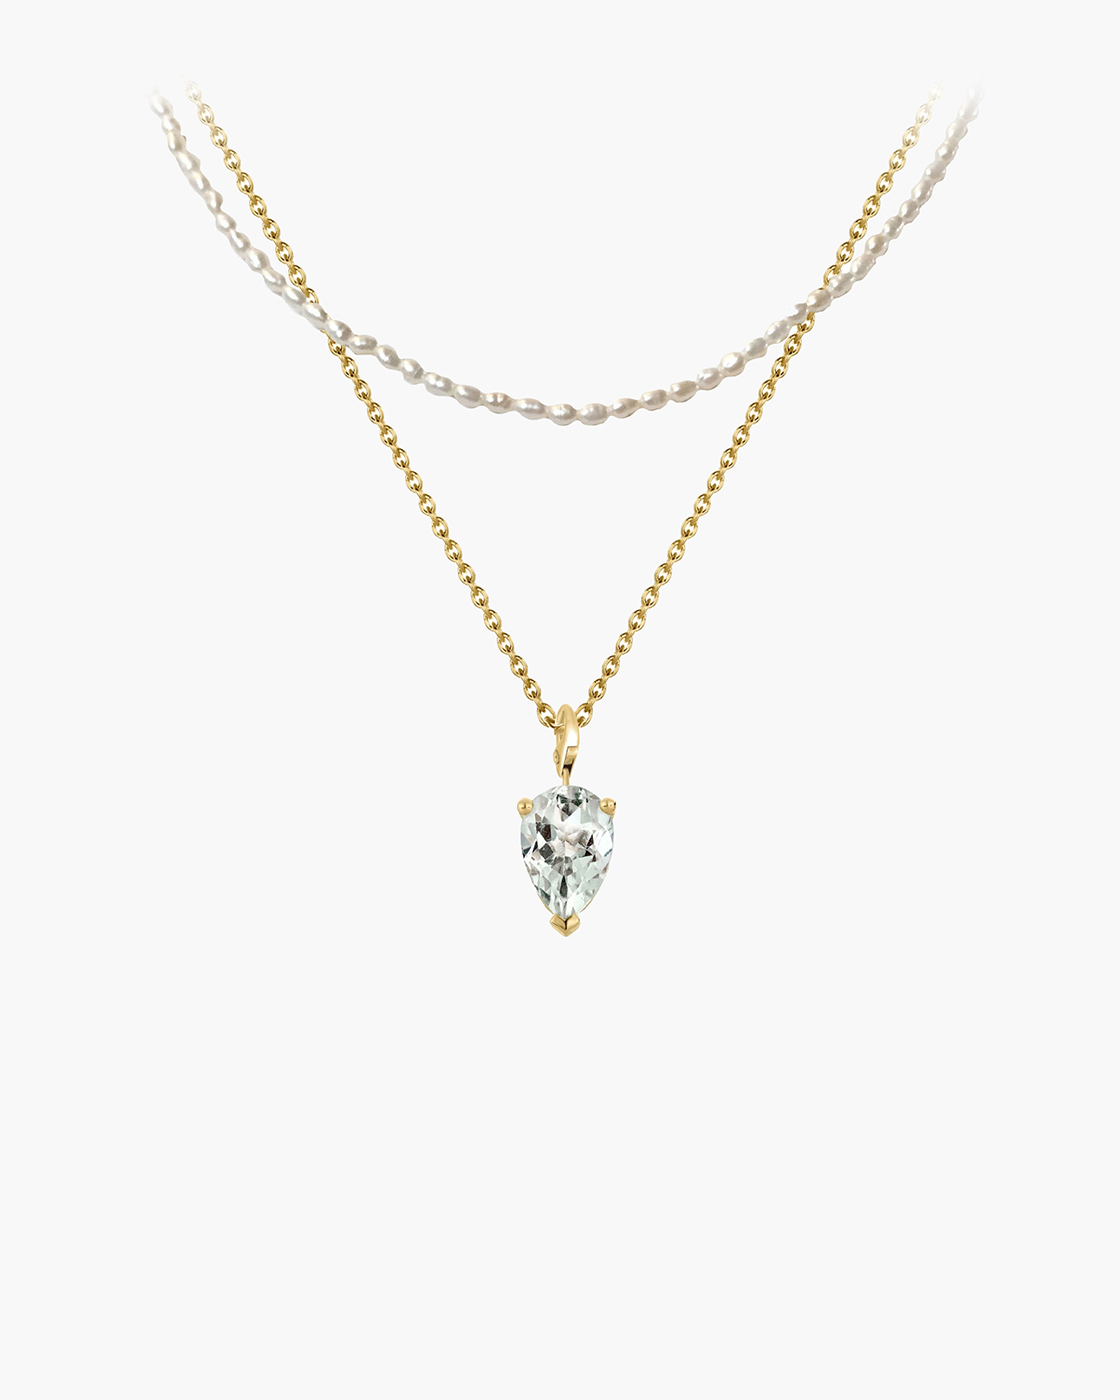 Bloom Perle und Green Amethyst abnehmbarer Charme Goldkette